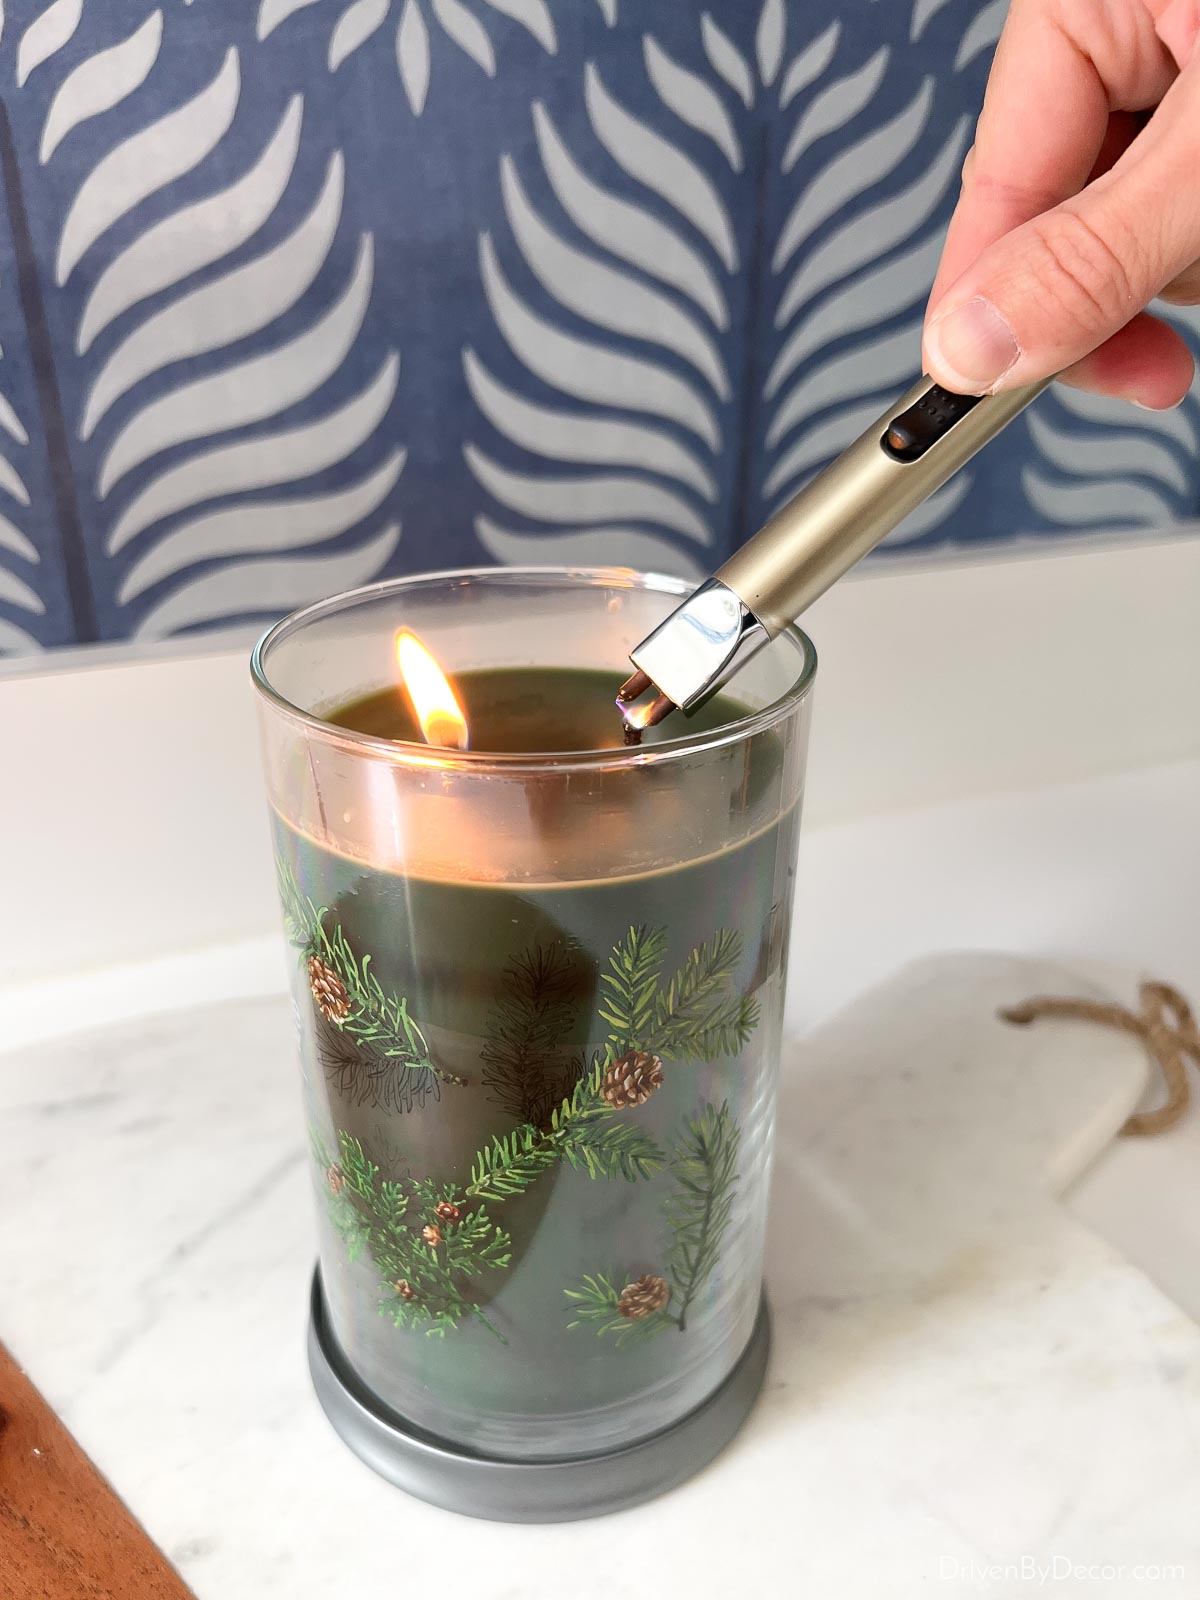 This electronic candle lighter would make a great stocking stuffer to put on your Christmas wish list!